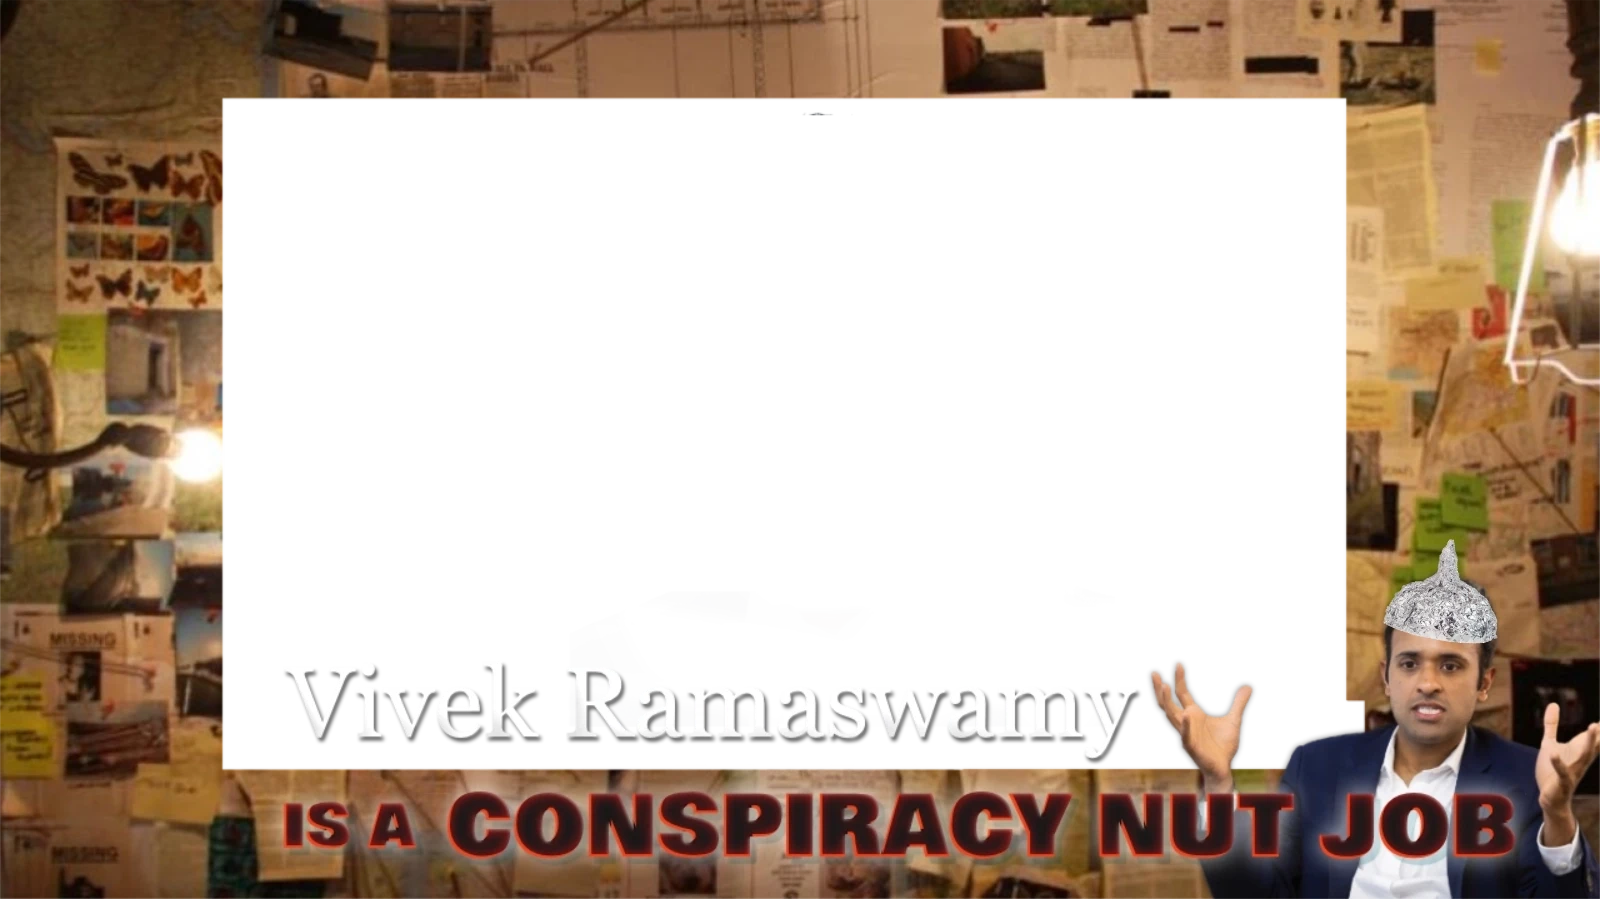 Learn the TRUTH about Vivek Ramaswamy - find out who he is now - image